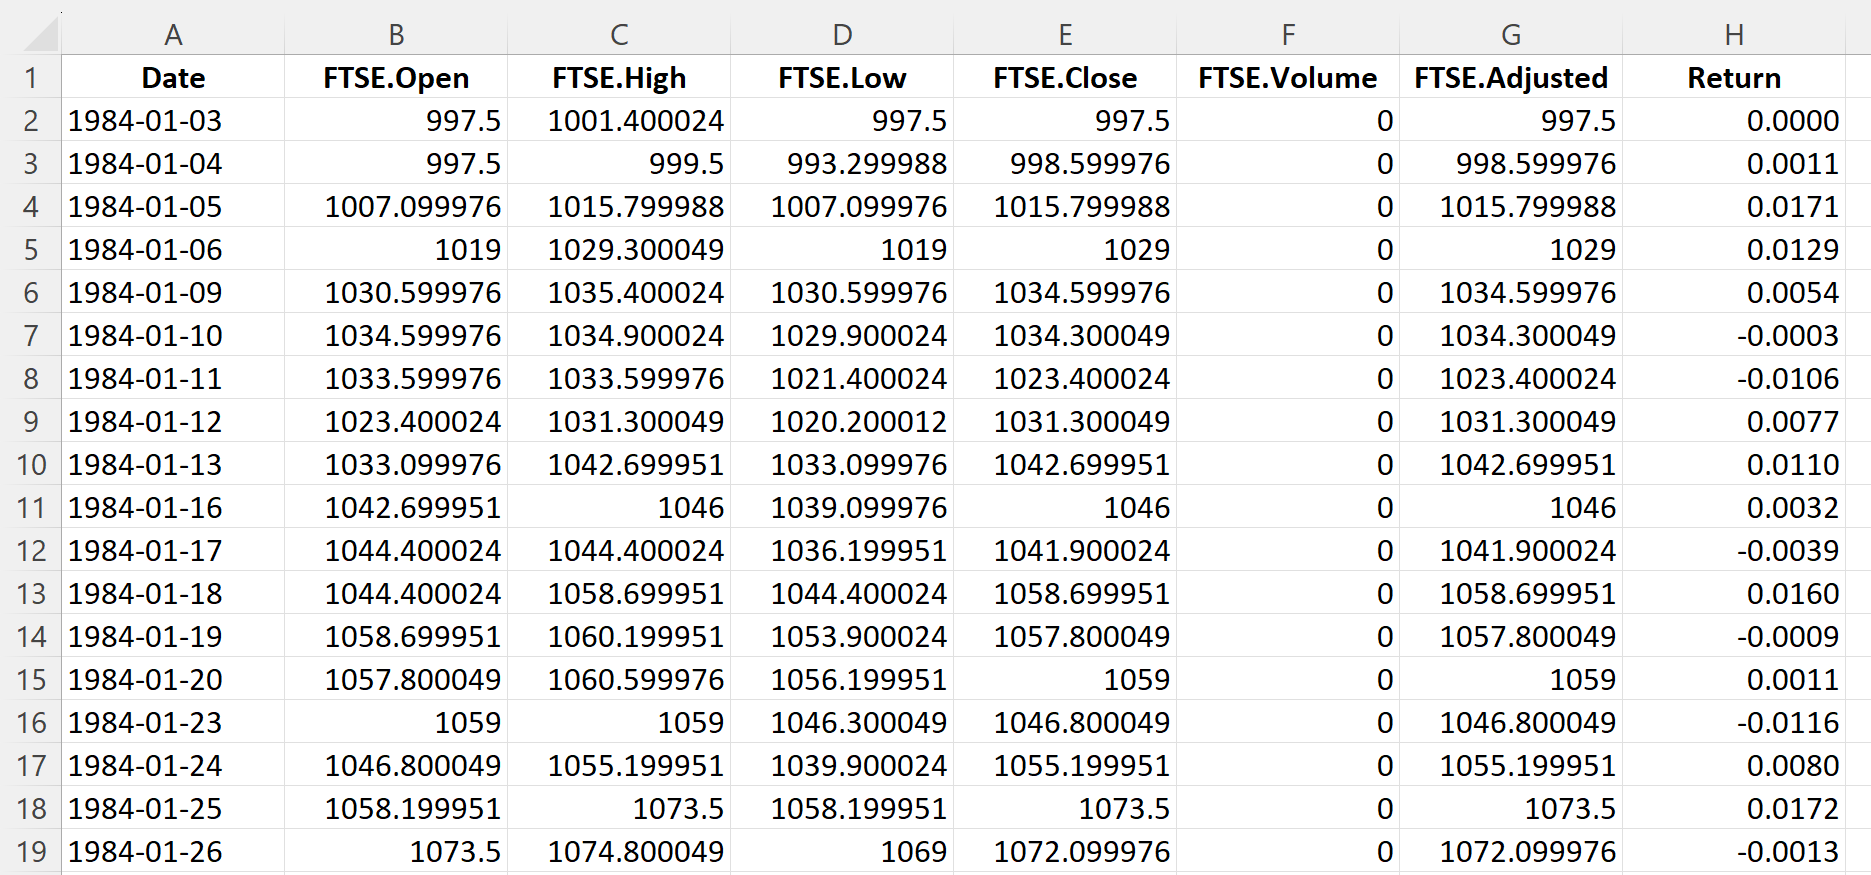 Top of the file for the FTSE 100 index data